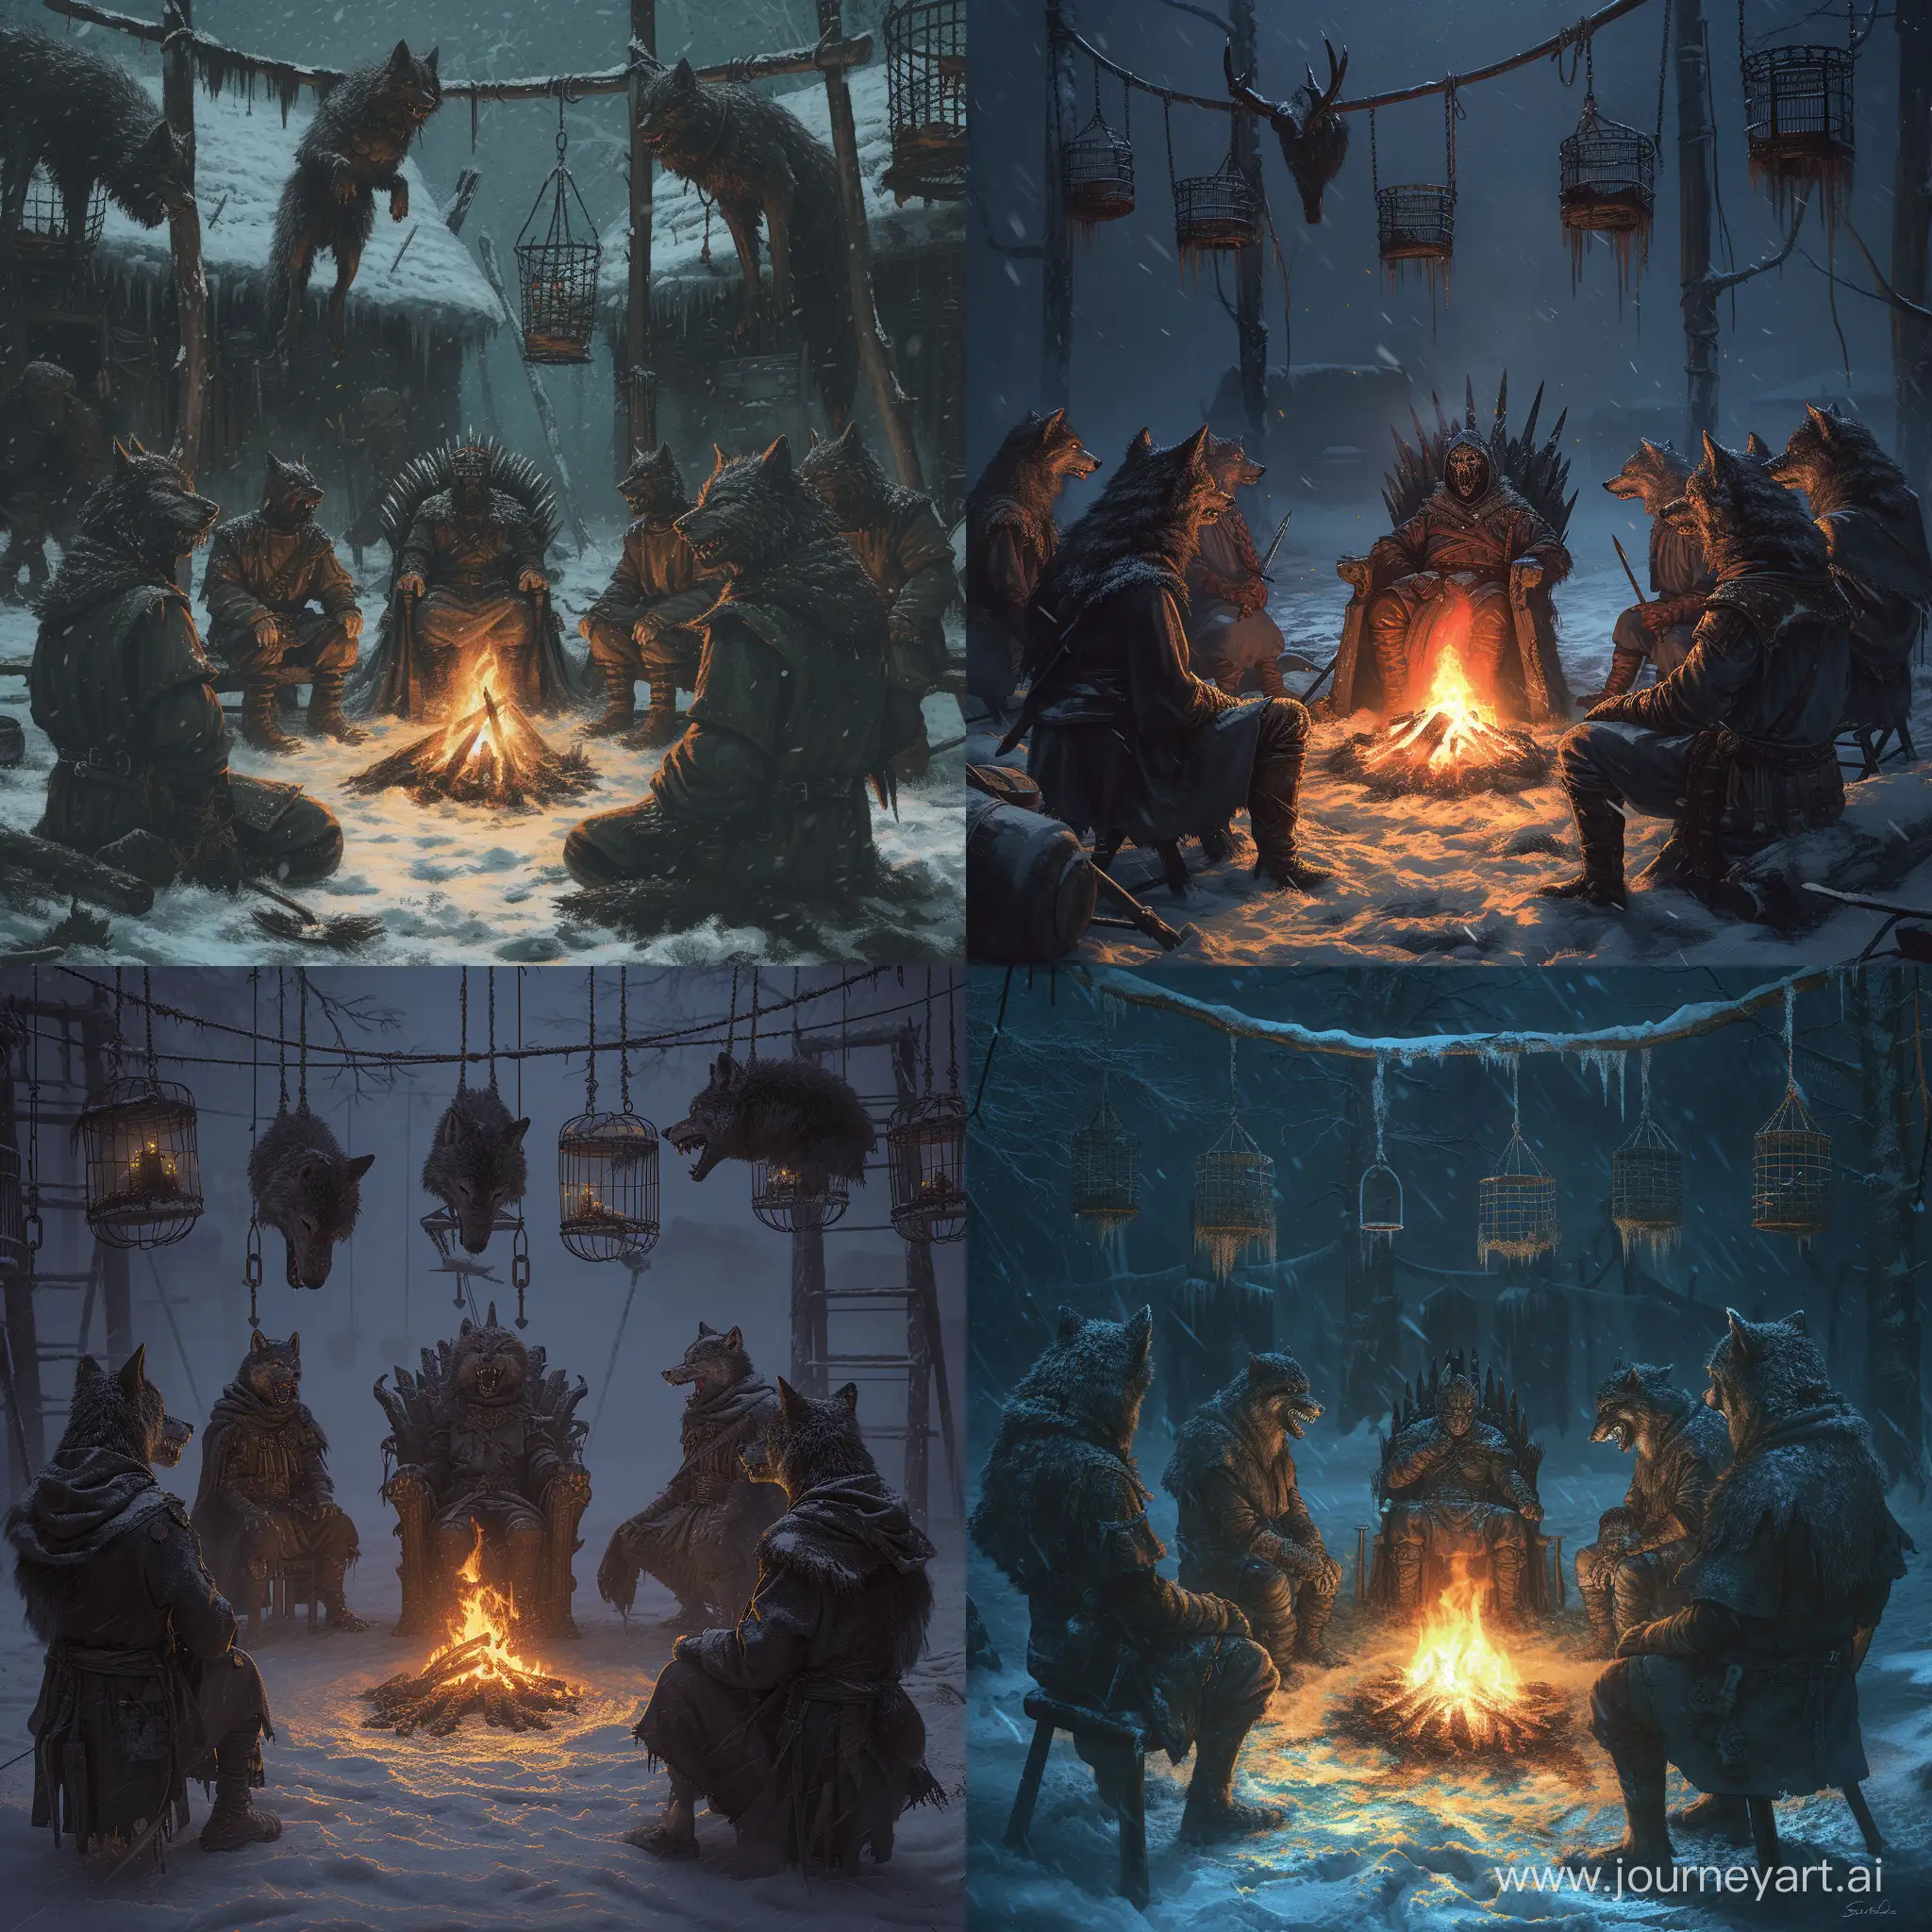 warriors with wolf's head and human body,circle around the fire,The leader of the wolves sitting on throne in the middle,in snowy horror camp,hanging Gibbet cages In the background,fierce,furious,irate,Detailed clothing.incredible detail,dark light,terrifying.